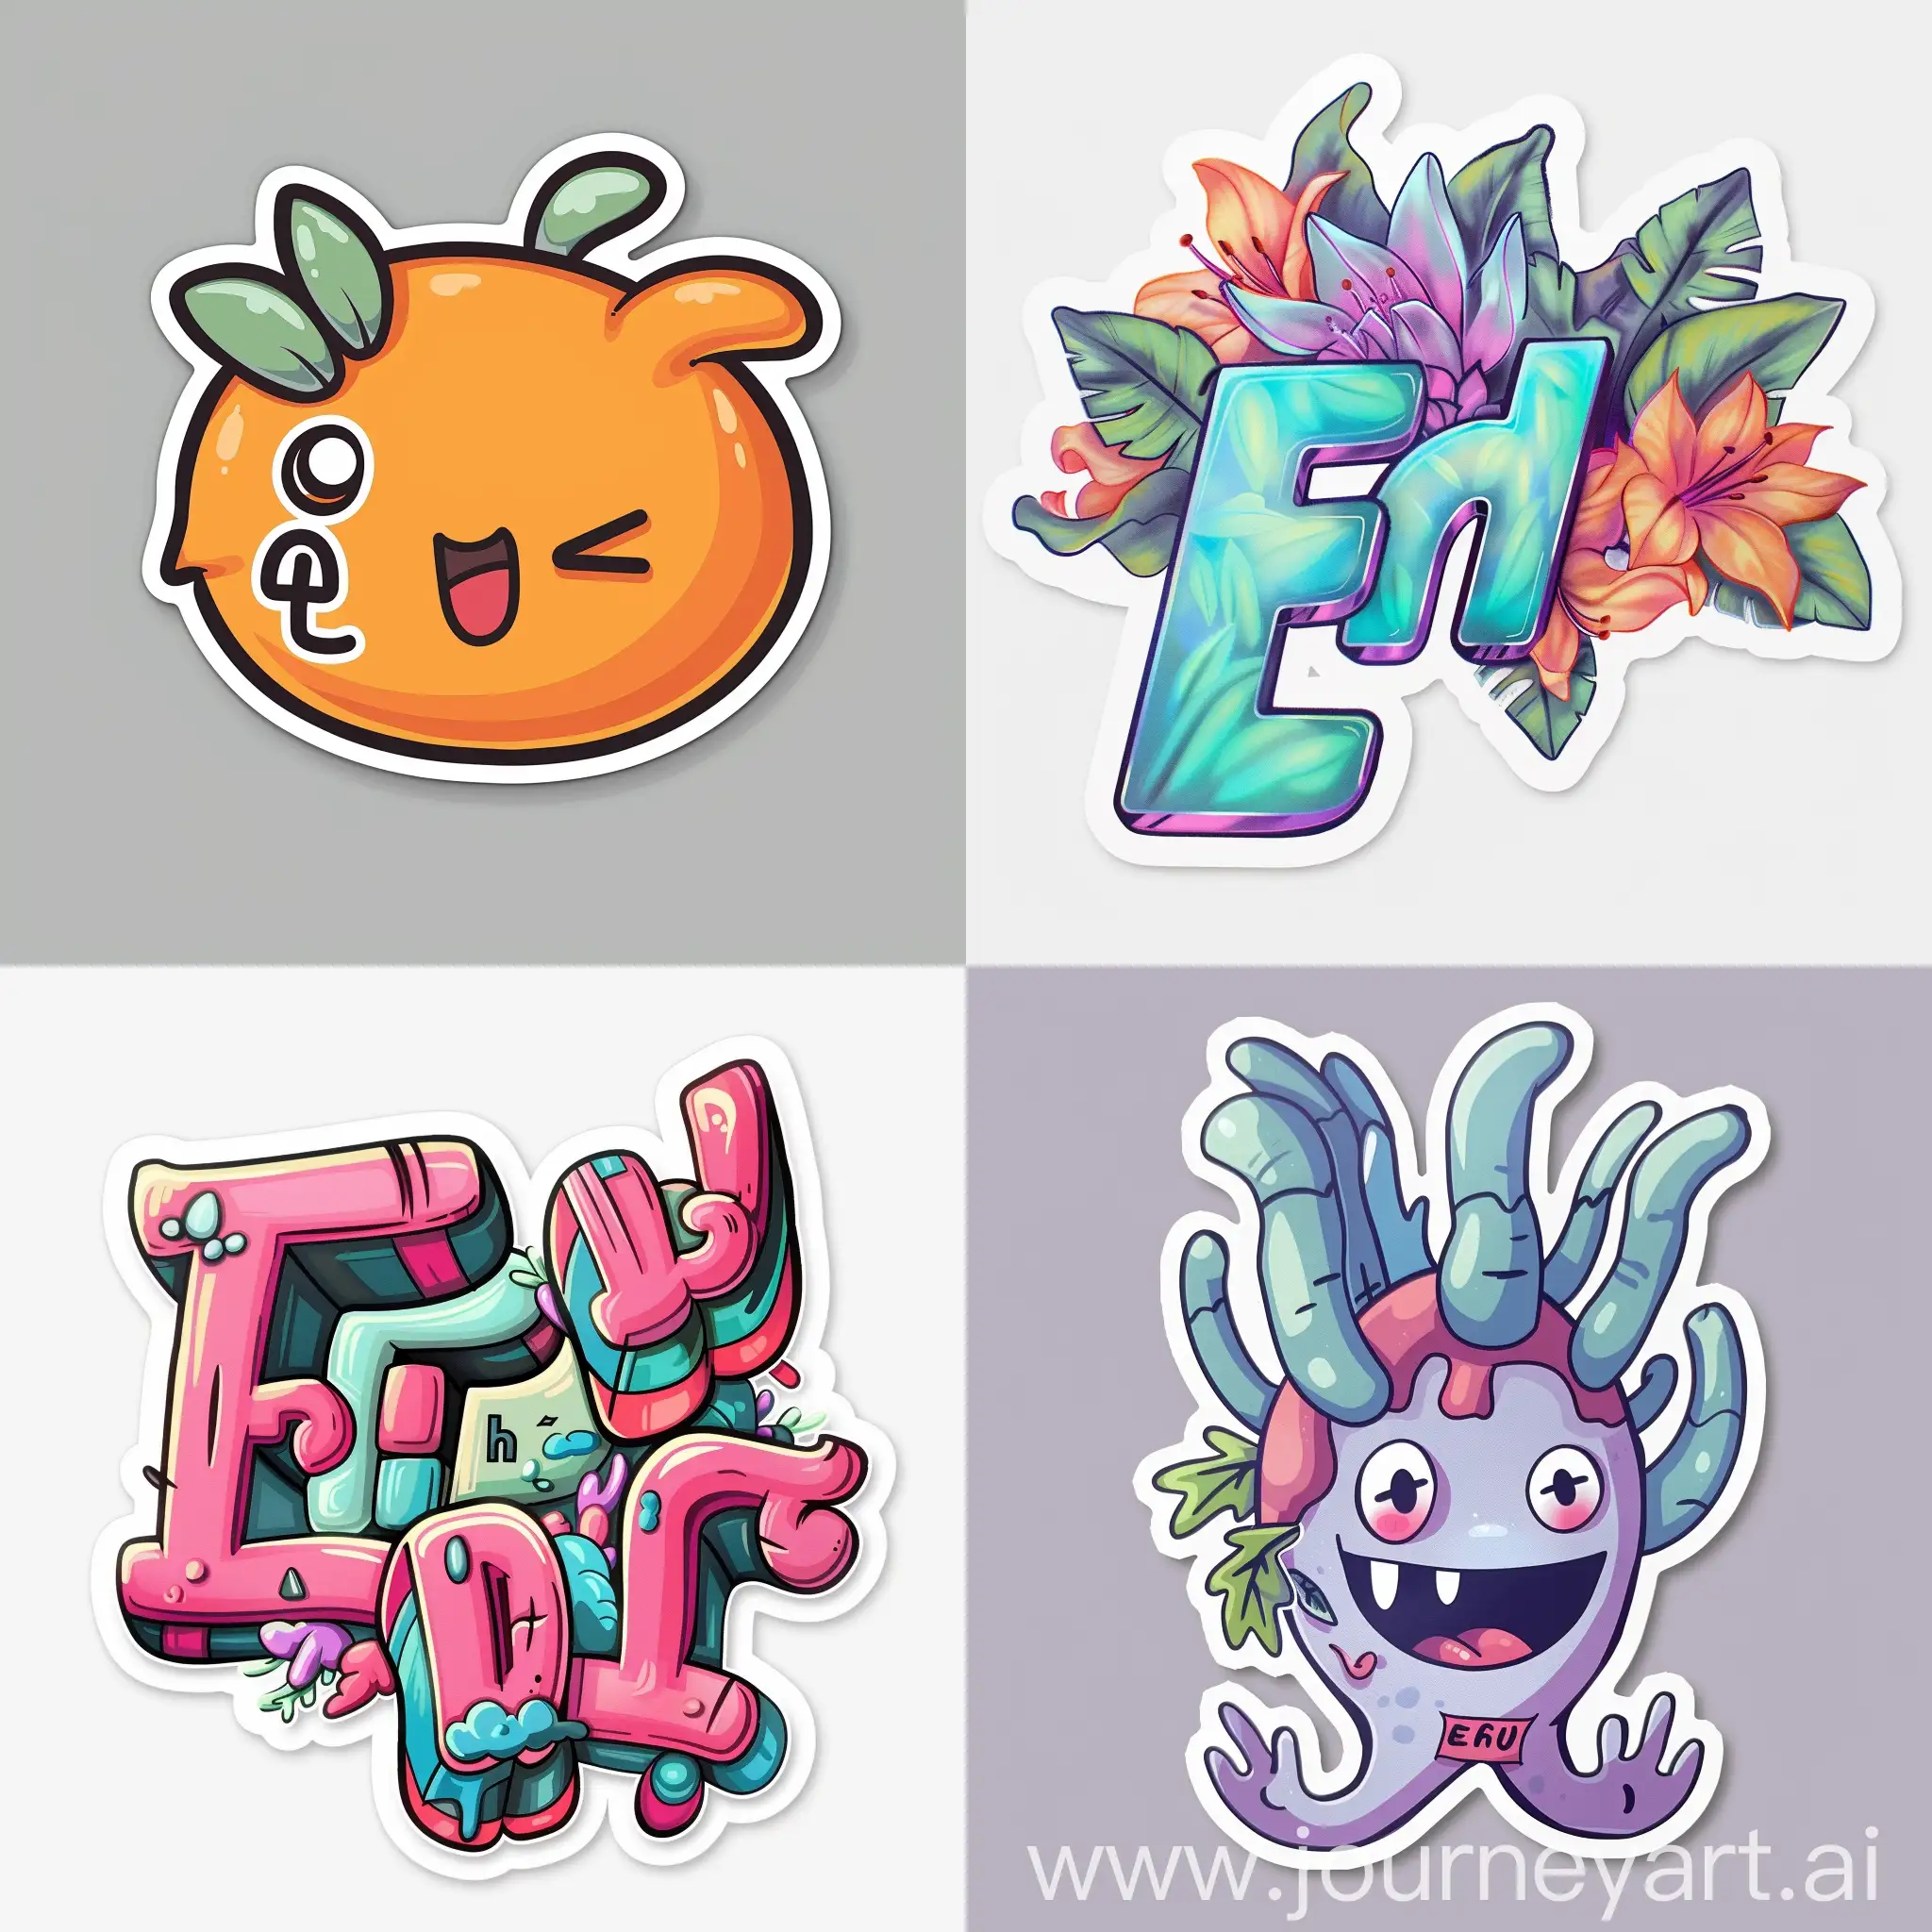 Colorful-Cartoon-Sticker-of-a-Playful-Eh